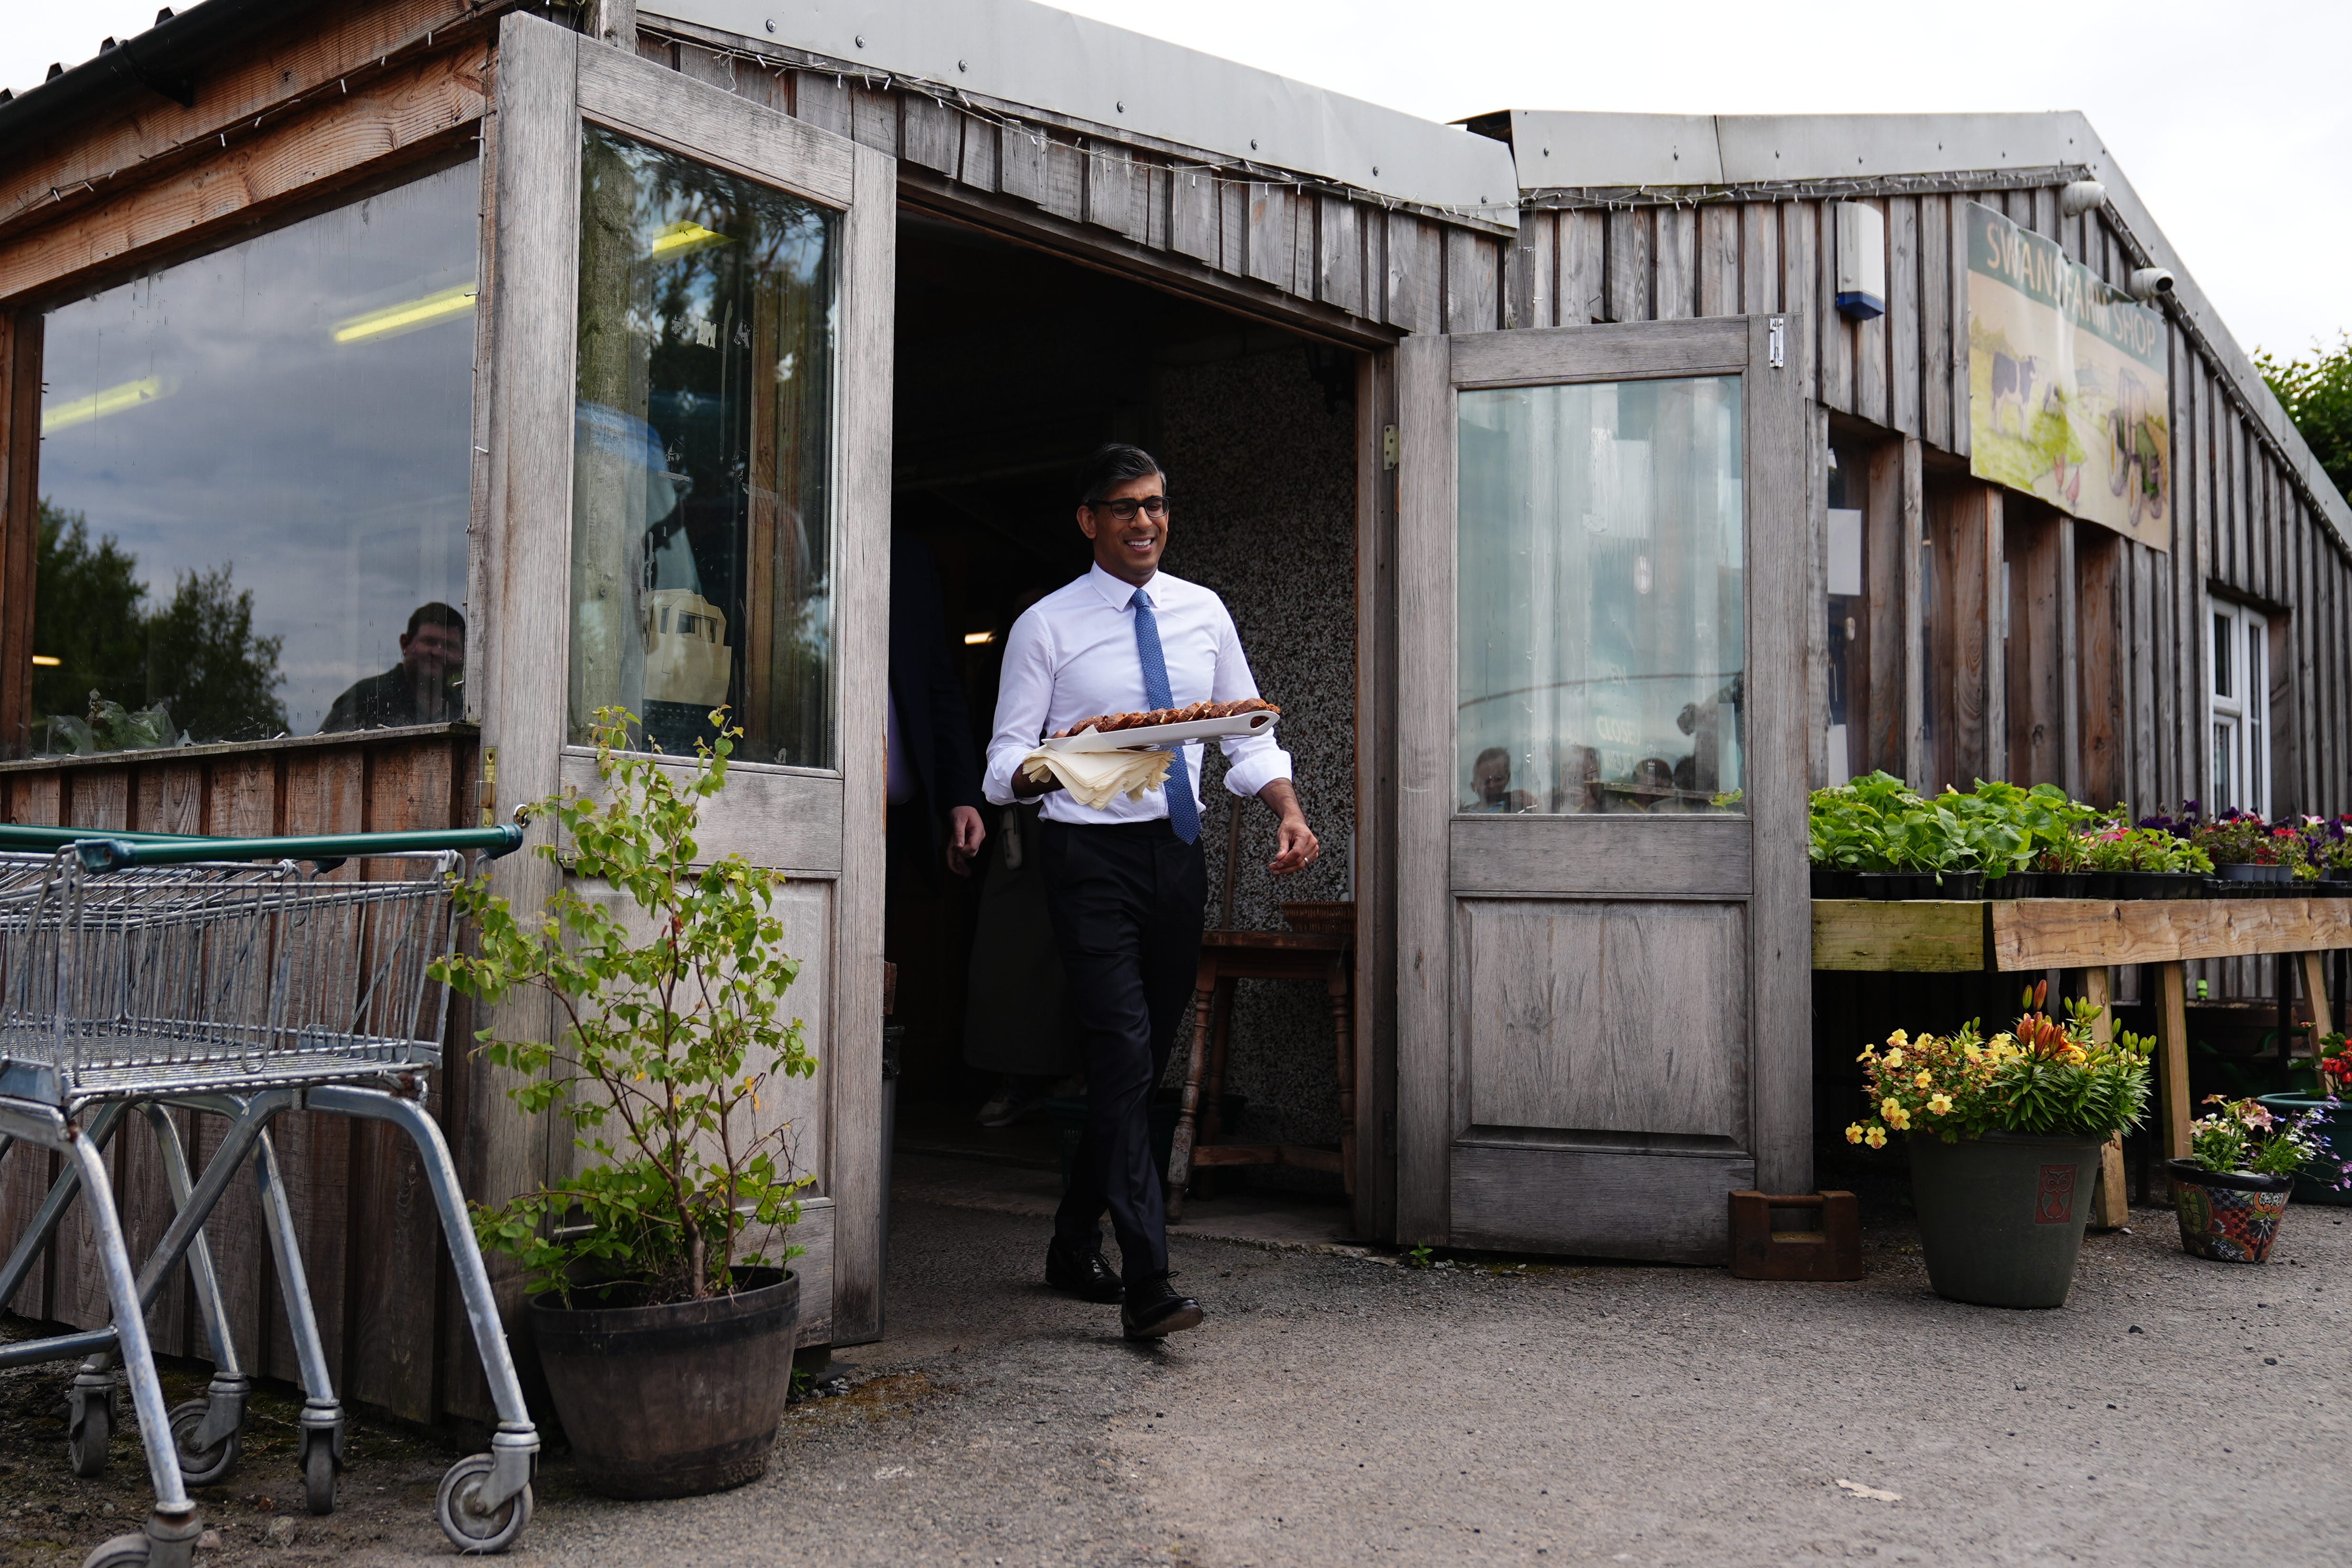 Rishi Sunak handed out Bara Brith cake to the media during a visit to a farm shop in Mold on Friday (Aaron Chown/PA)